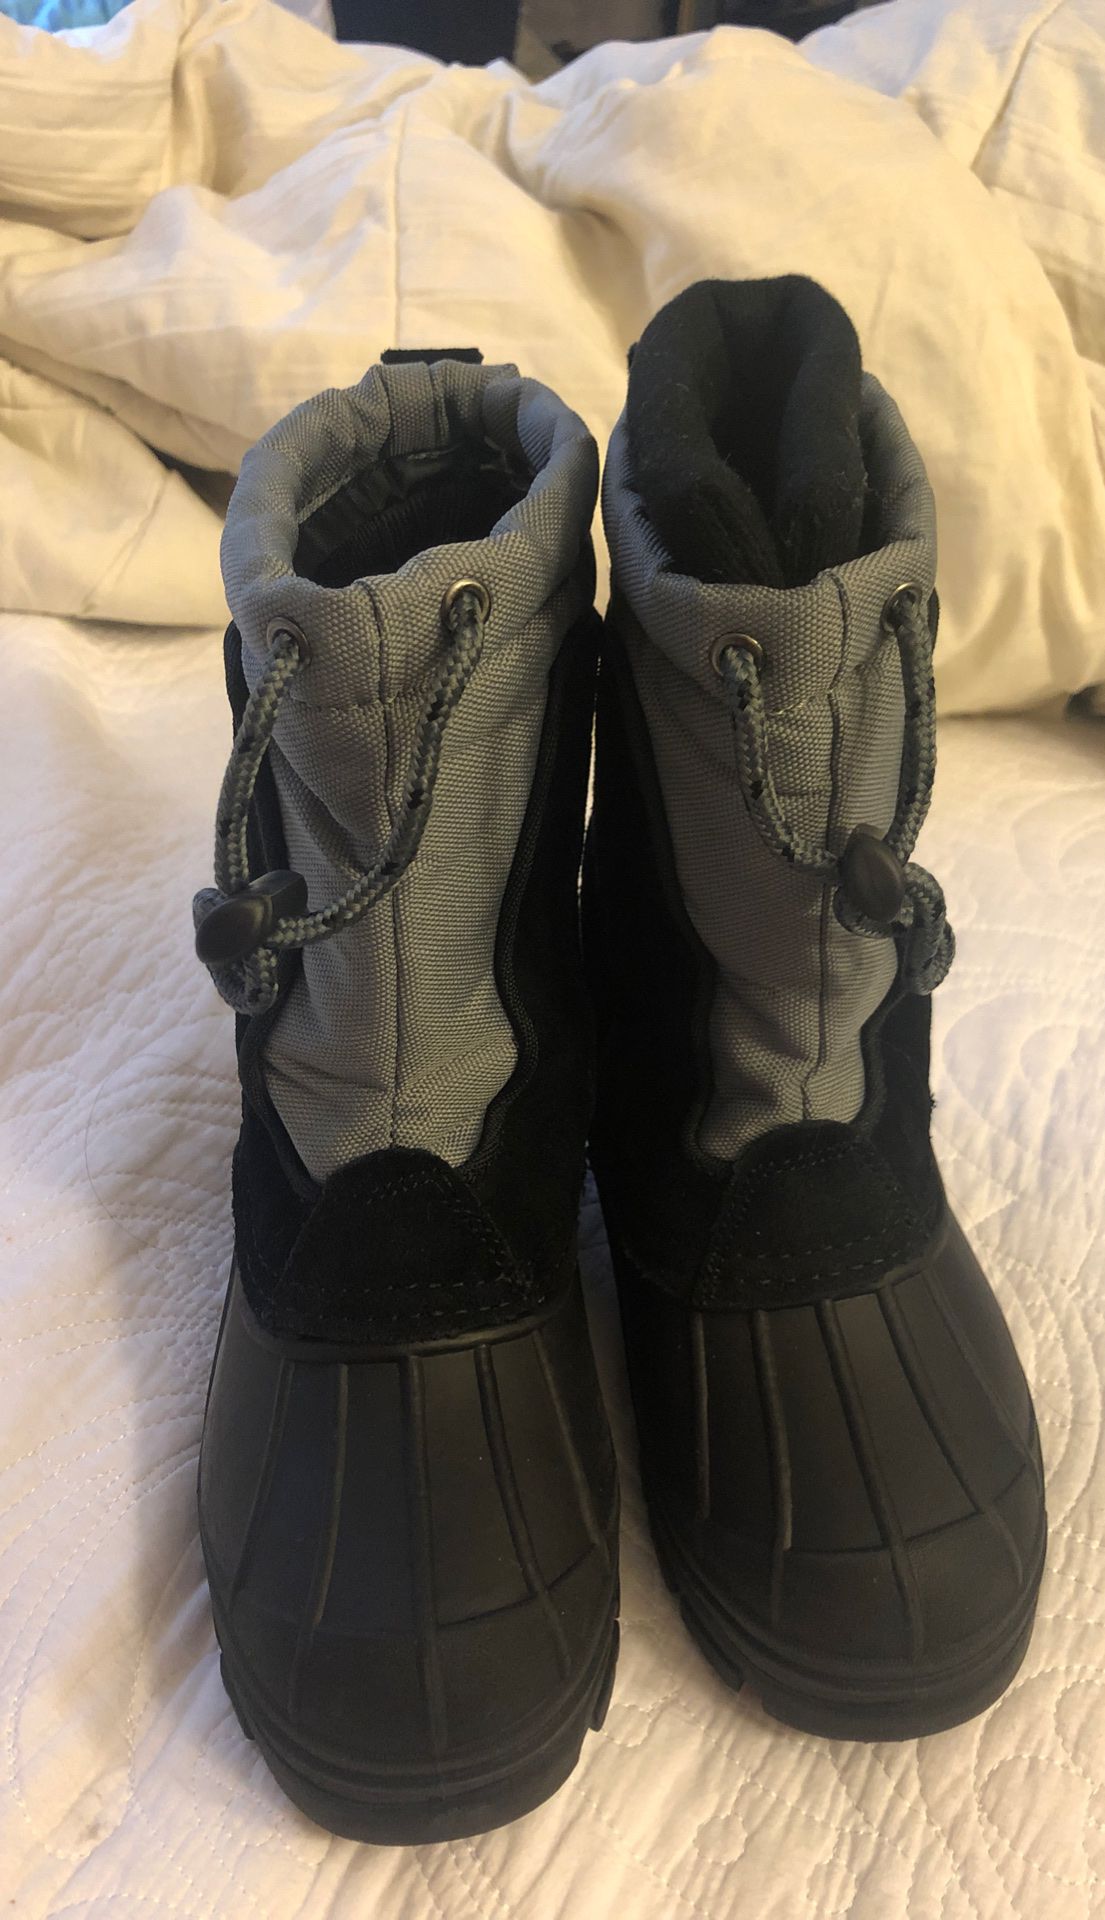 Kid(toddler) boy snow boots size 12 ages 4-5